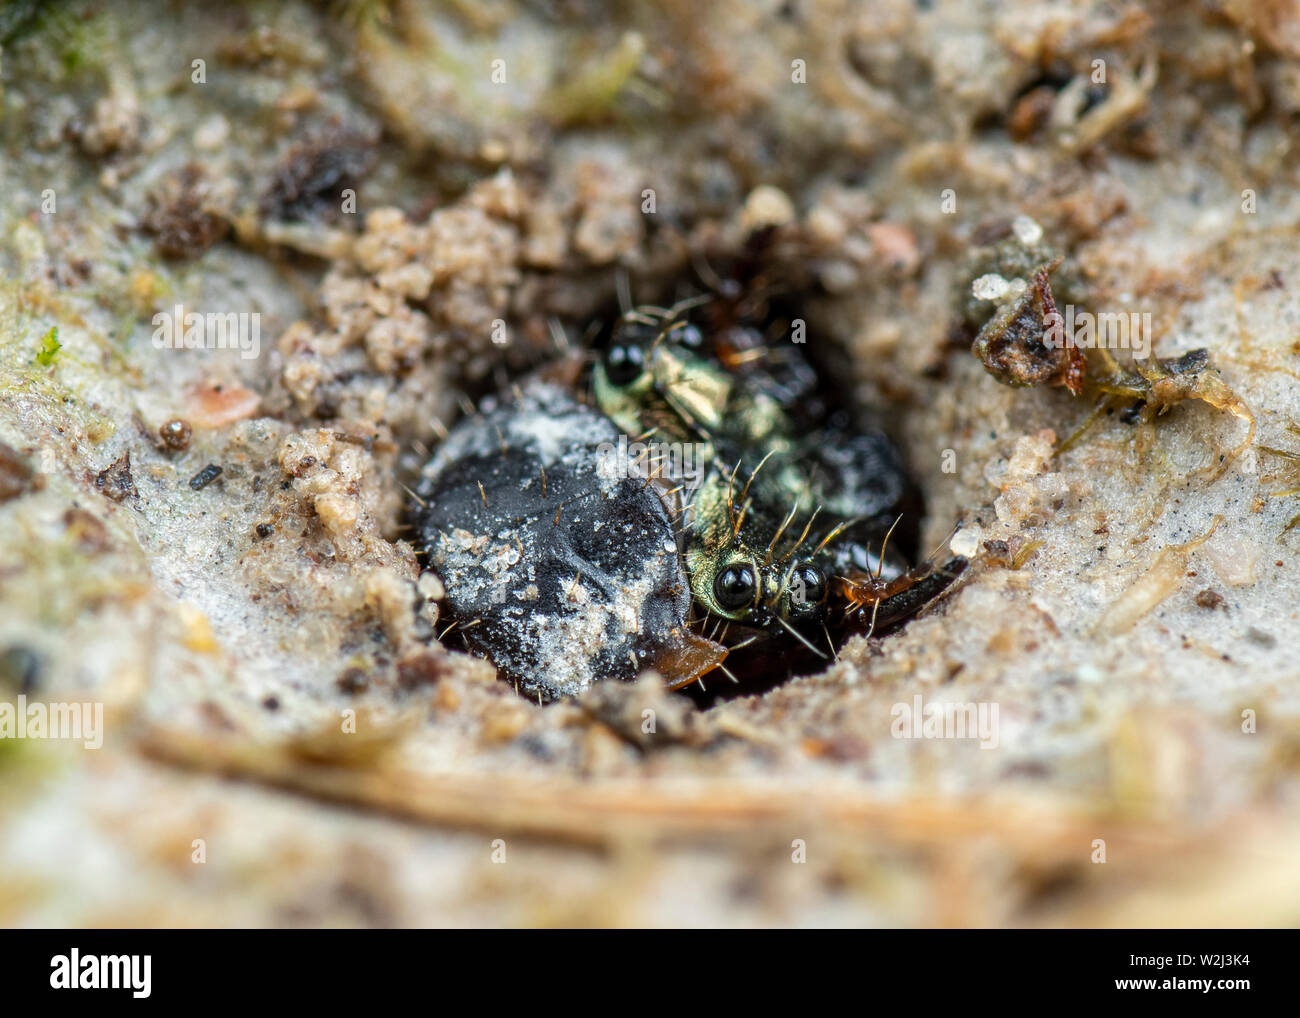 Larval form of a tiger beetle, Cicindelidae, waiting to ambush prey from its burrow Stock Photo